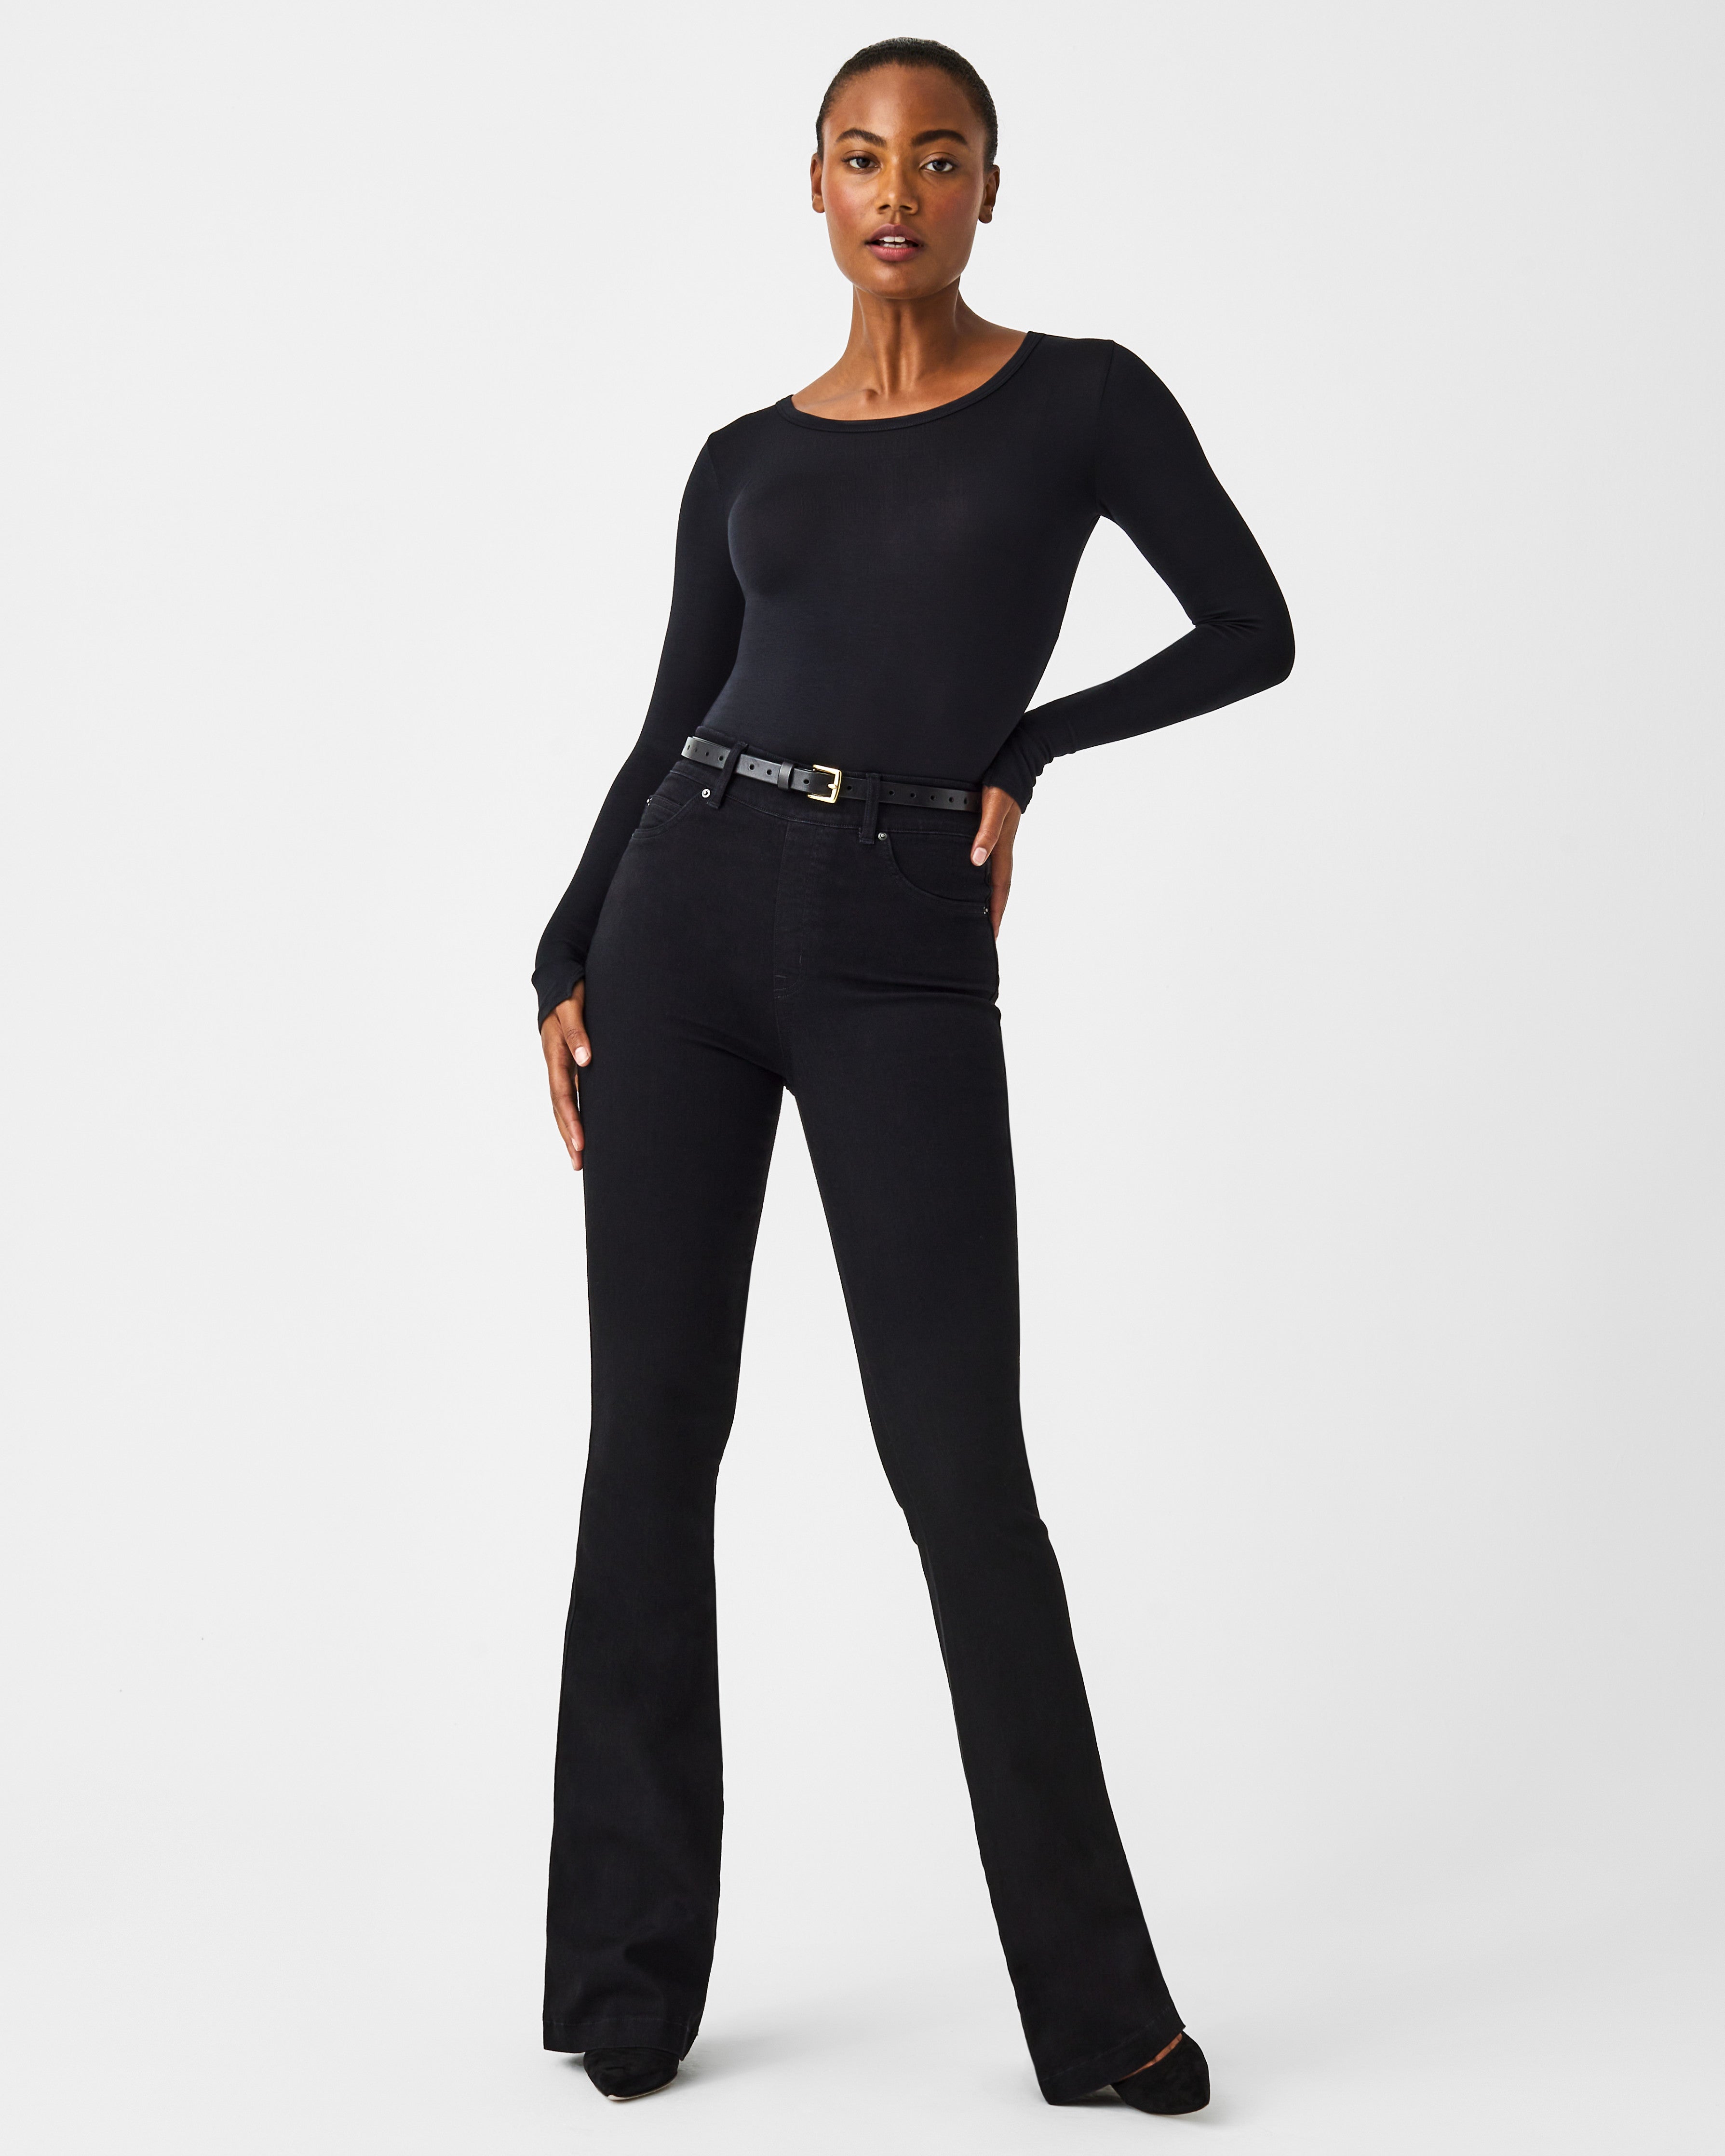 Cotton: On Petite flare pants in charcoal grey